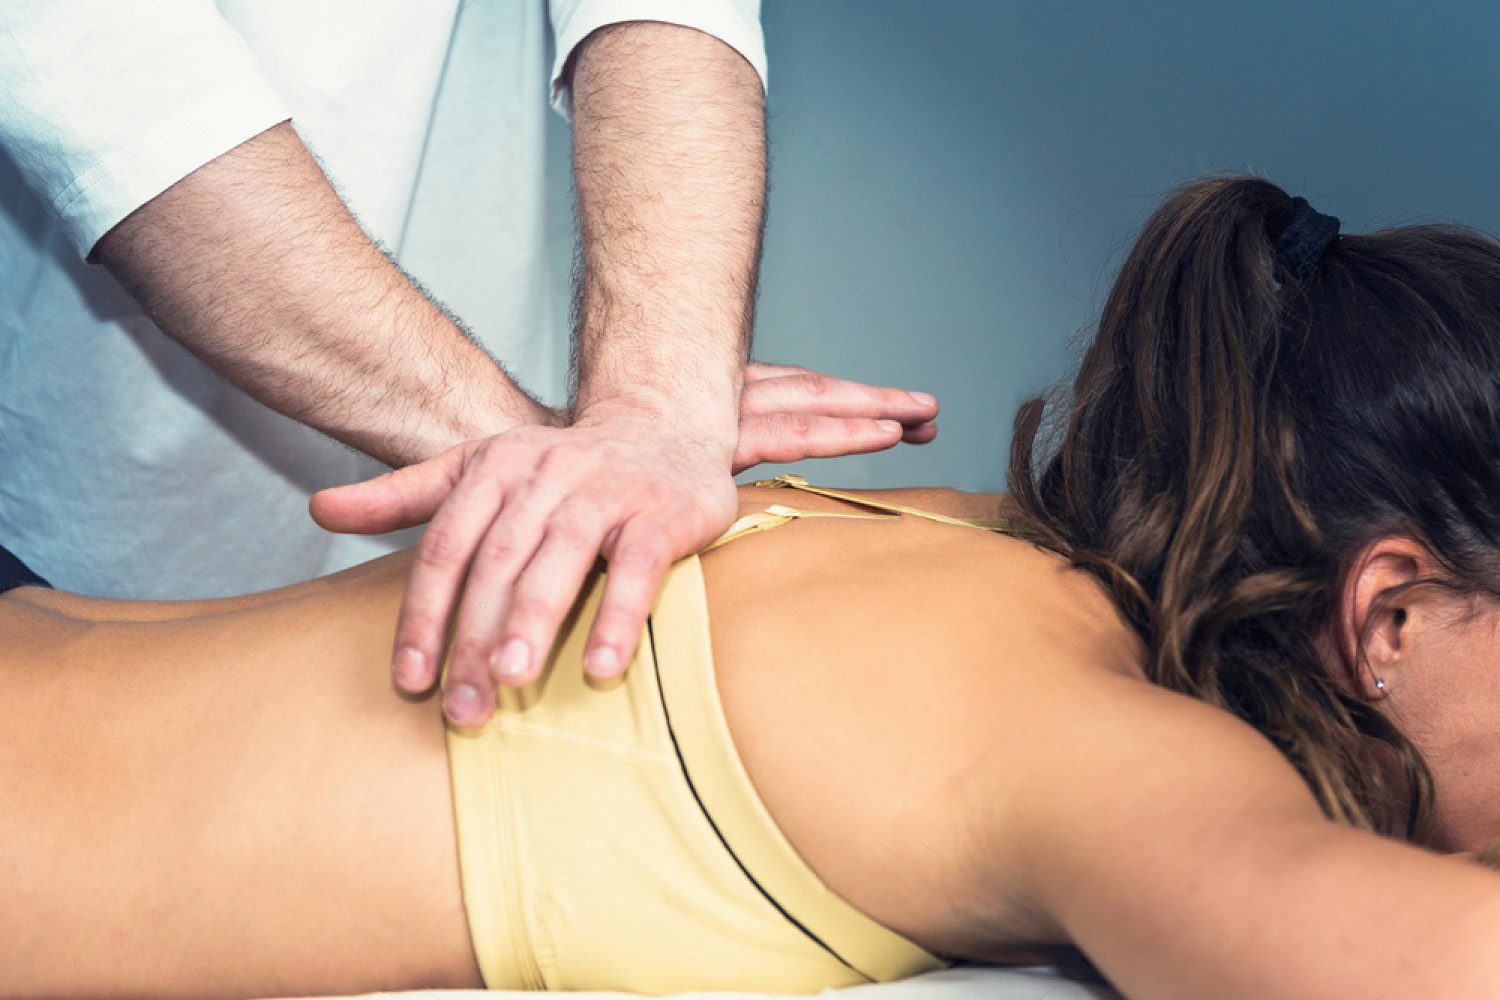 chiropractor doing a spinal adjustment on lady